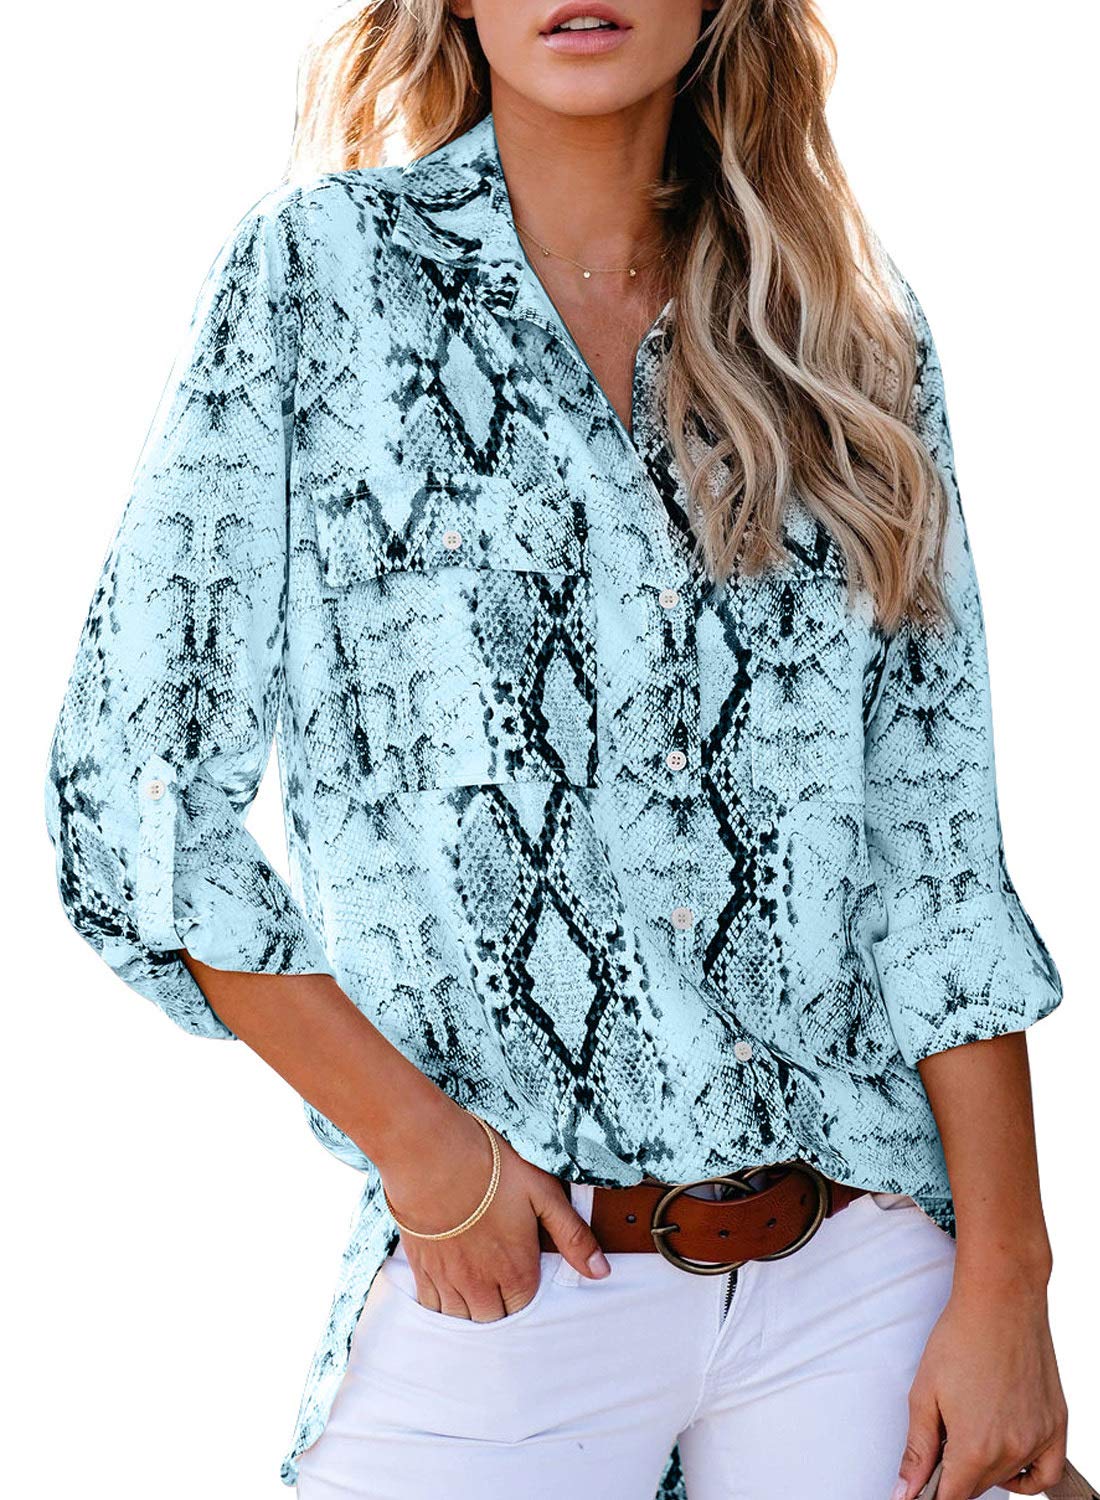 Astylish Women Snake Print Button Down Long Roll up Sleeves Work Shirt Blouse Tops Blue Large